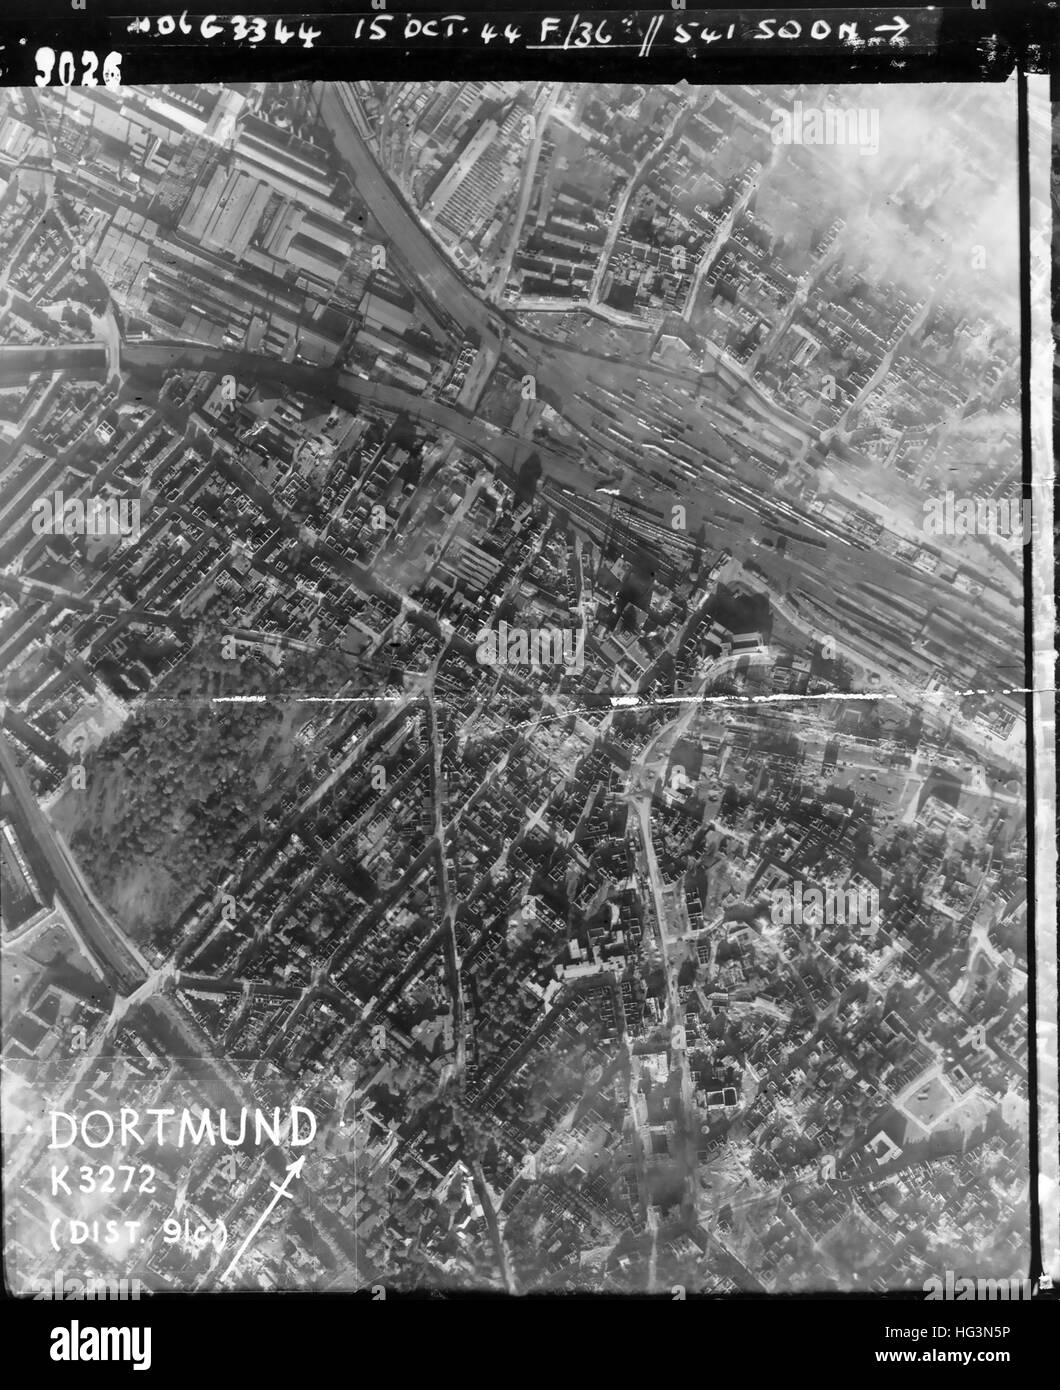 DORTMUND, Germany in an aerial reconnaissance photo on 15 October 1944 showing bomb damage in the area south west of the main railway station. Stock Photo